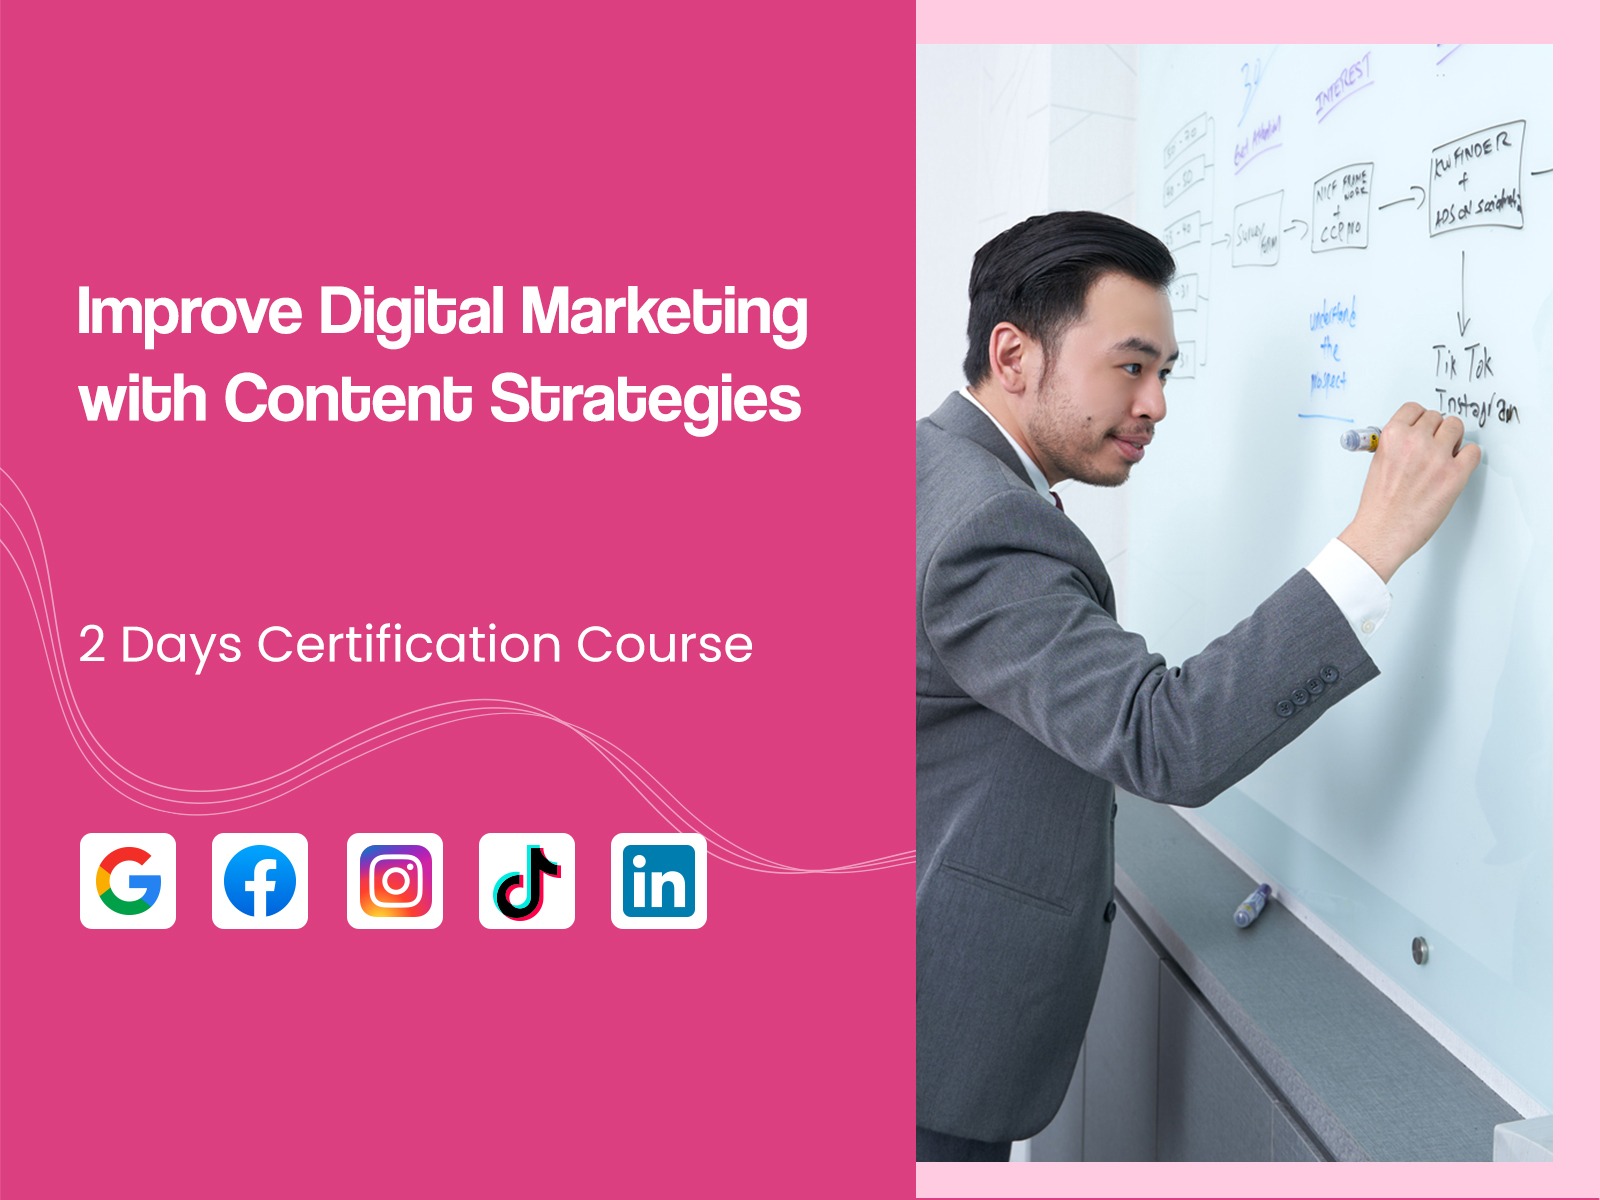 Improve Digital Marketing with Content Strategies